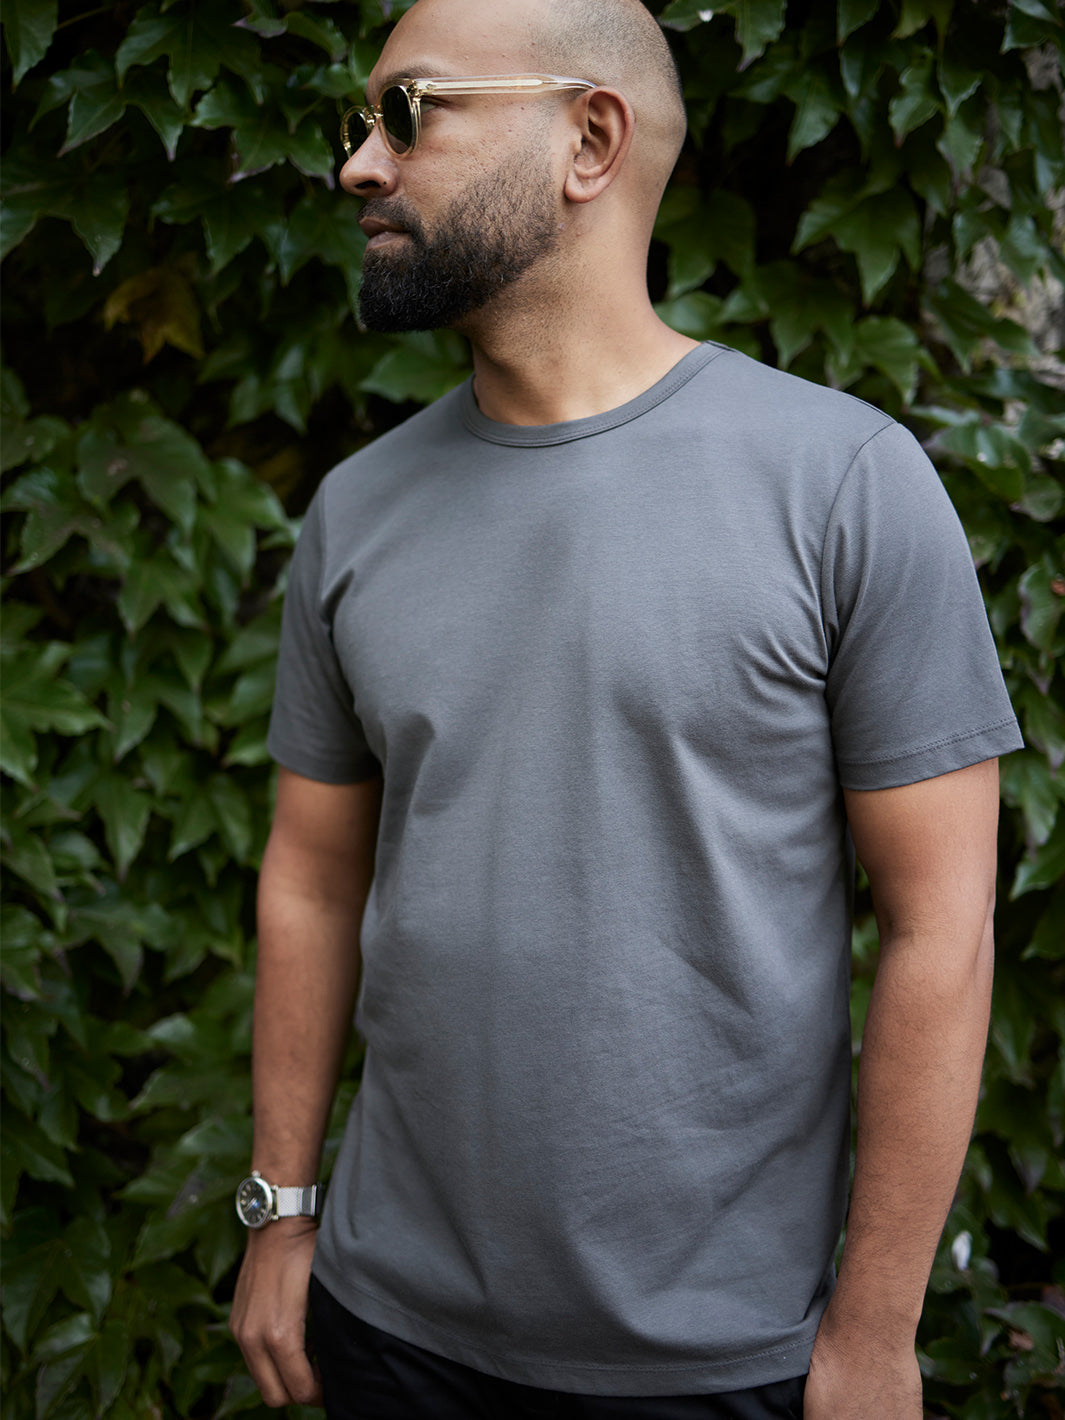 Bound Daily Tee - Charcoal